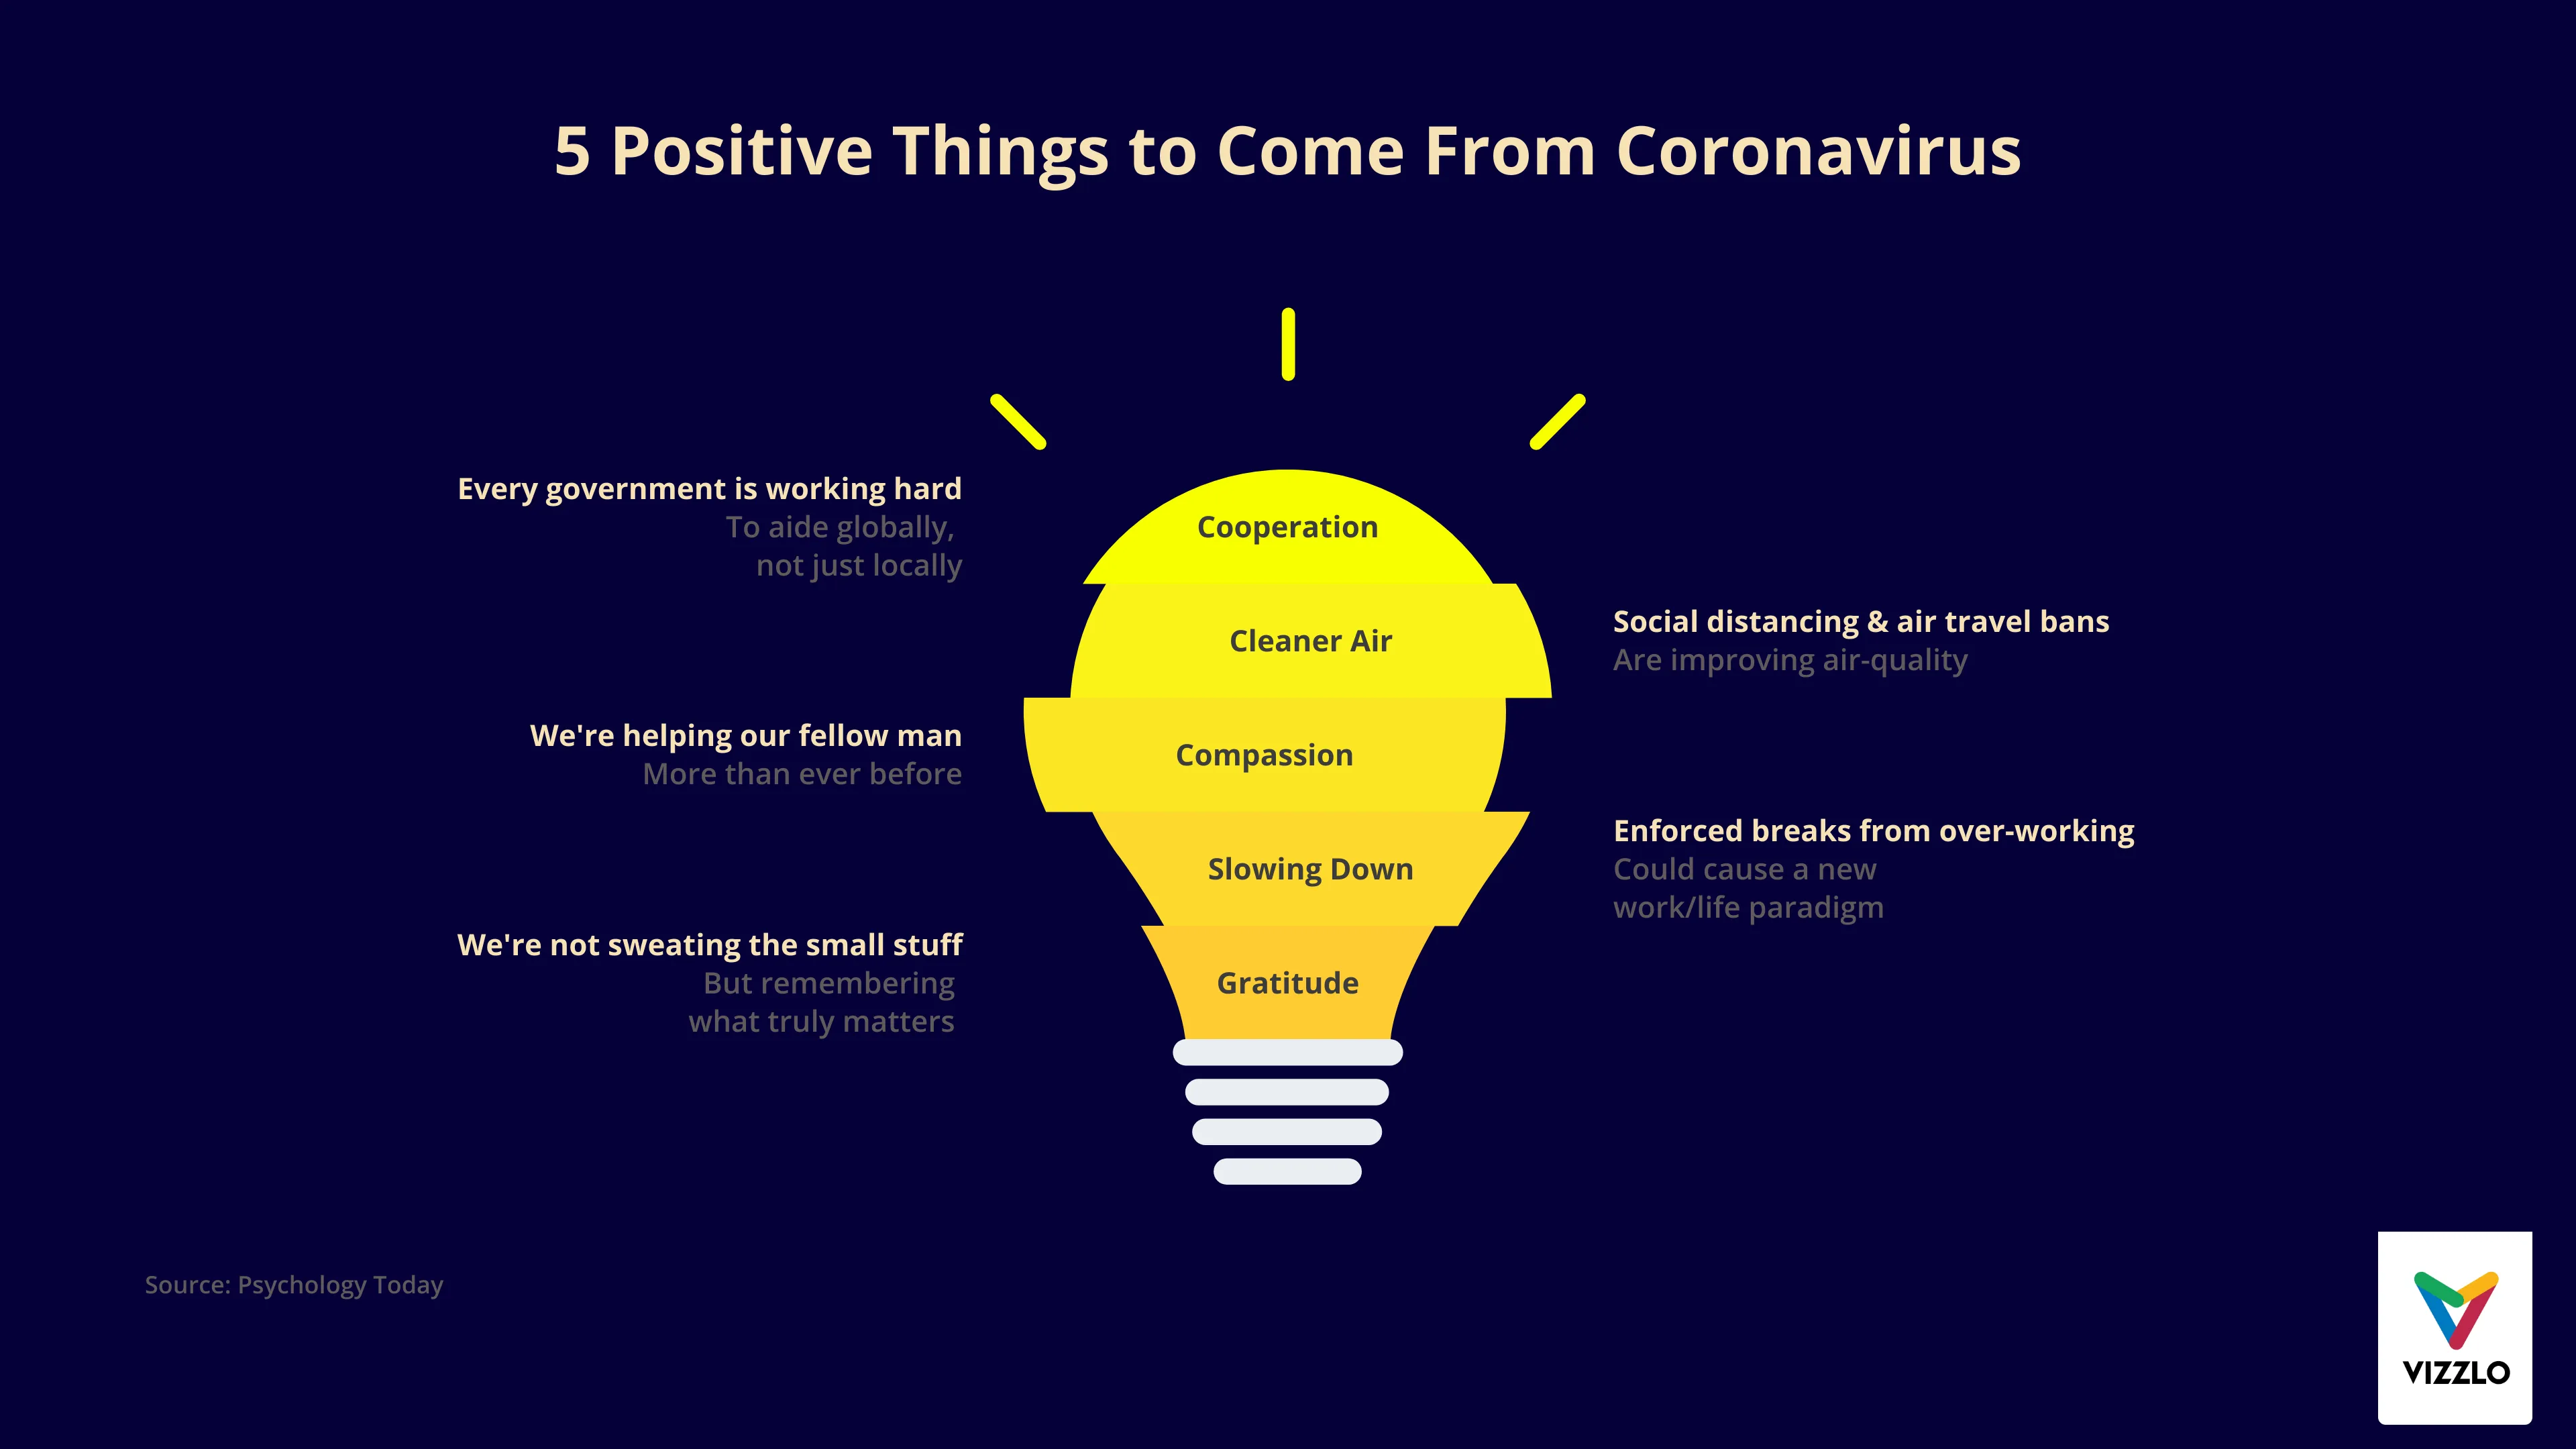 5 Positive Things to Come From Coronavirus